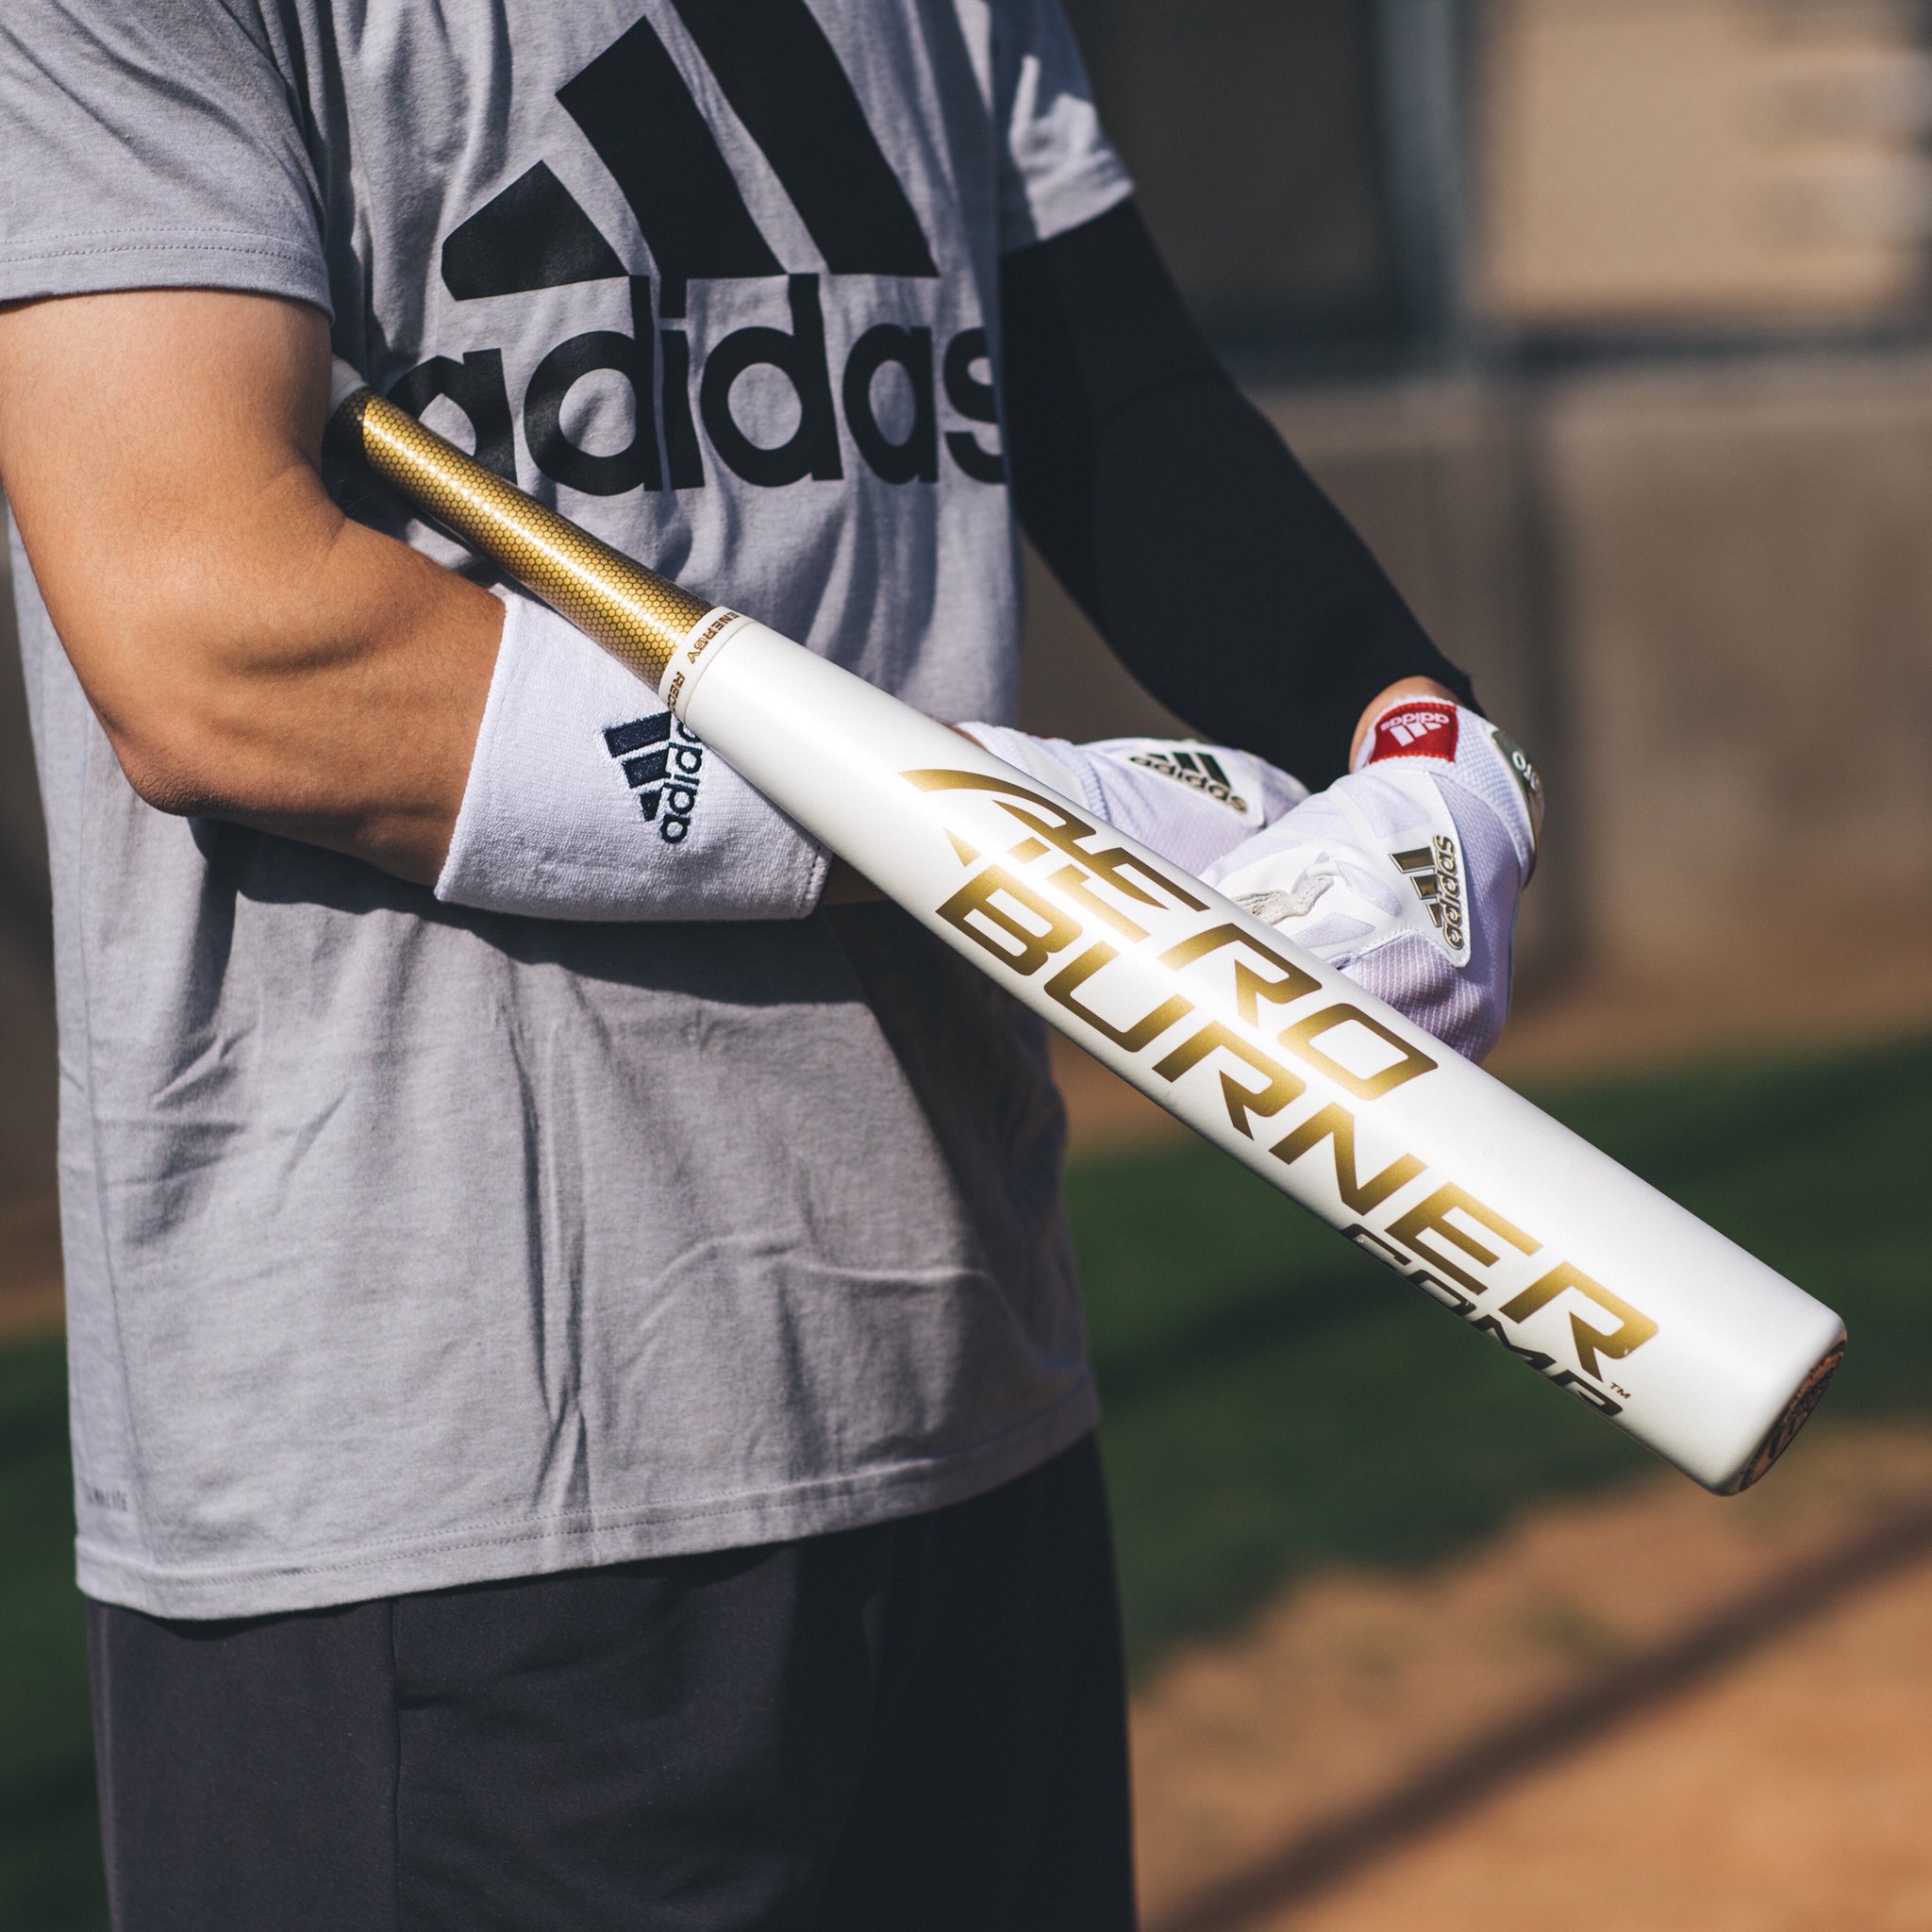 Dugout on "Mashed. Taters. Stay eatin' with the white/gold Aero Burner composite. Available now: #AeroBurner https://t.co/DGqj58yTQi" / Twitter